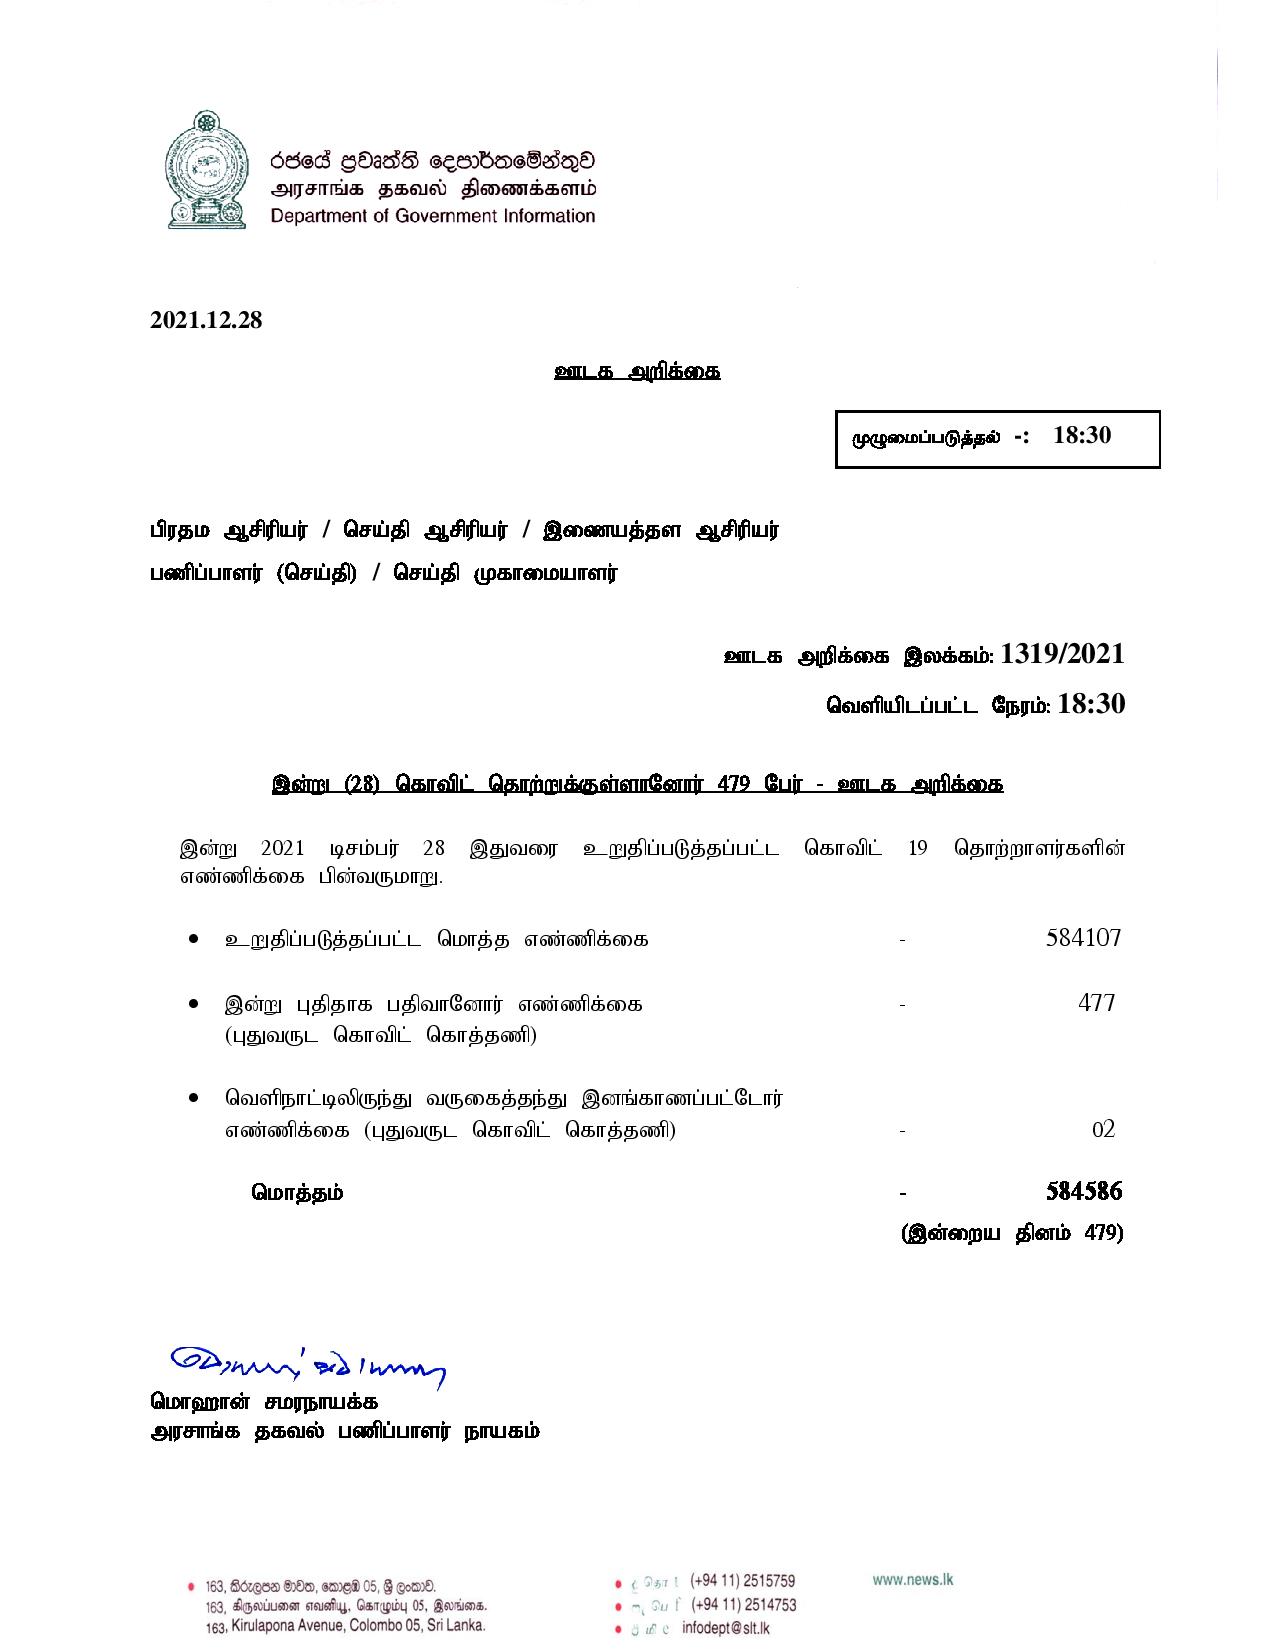 Press Release 1319 Tamil page 001